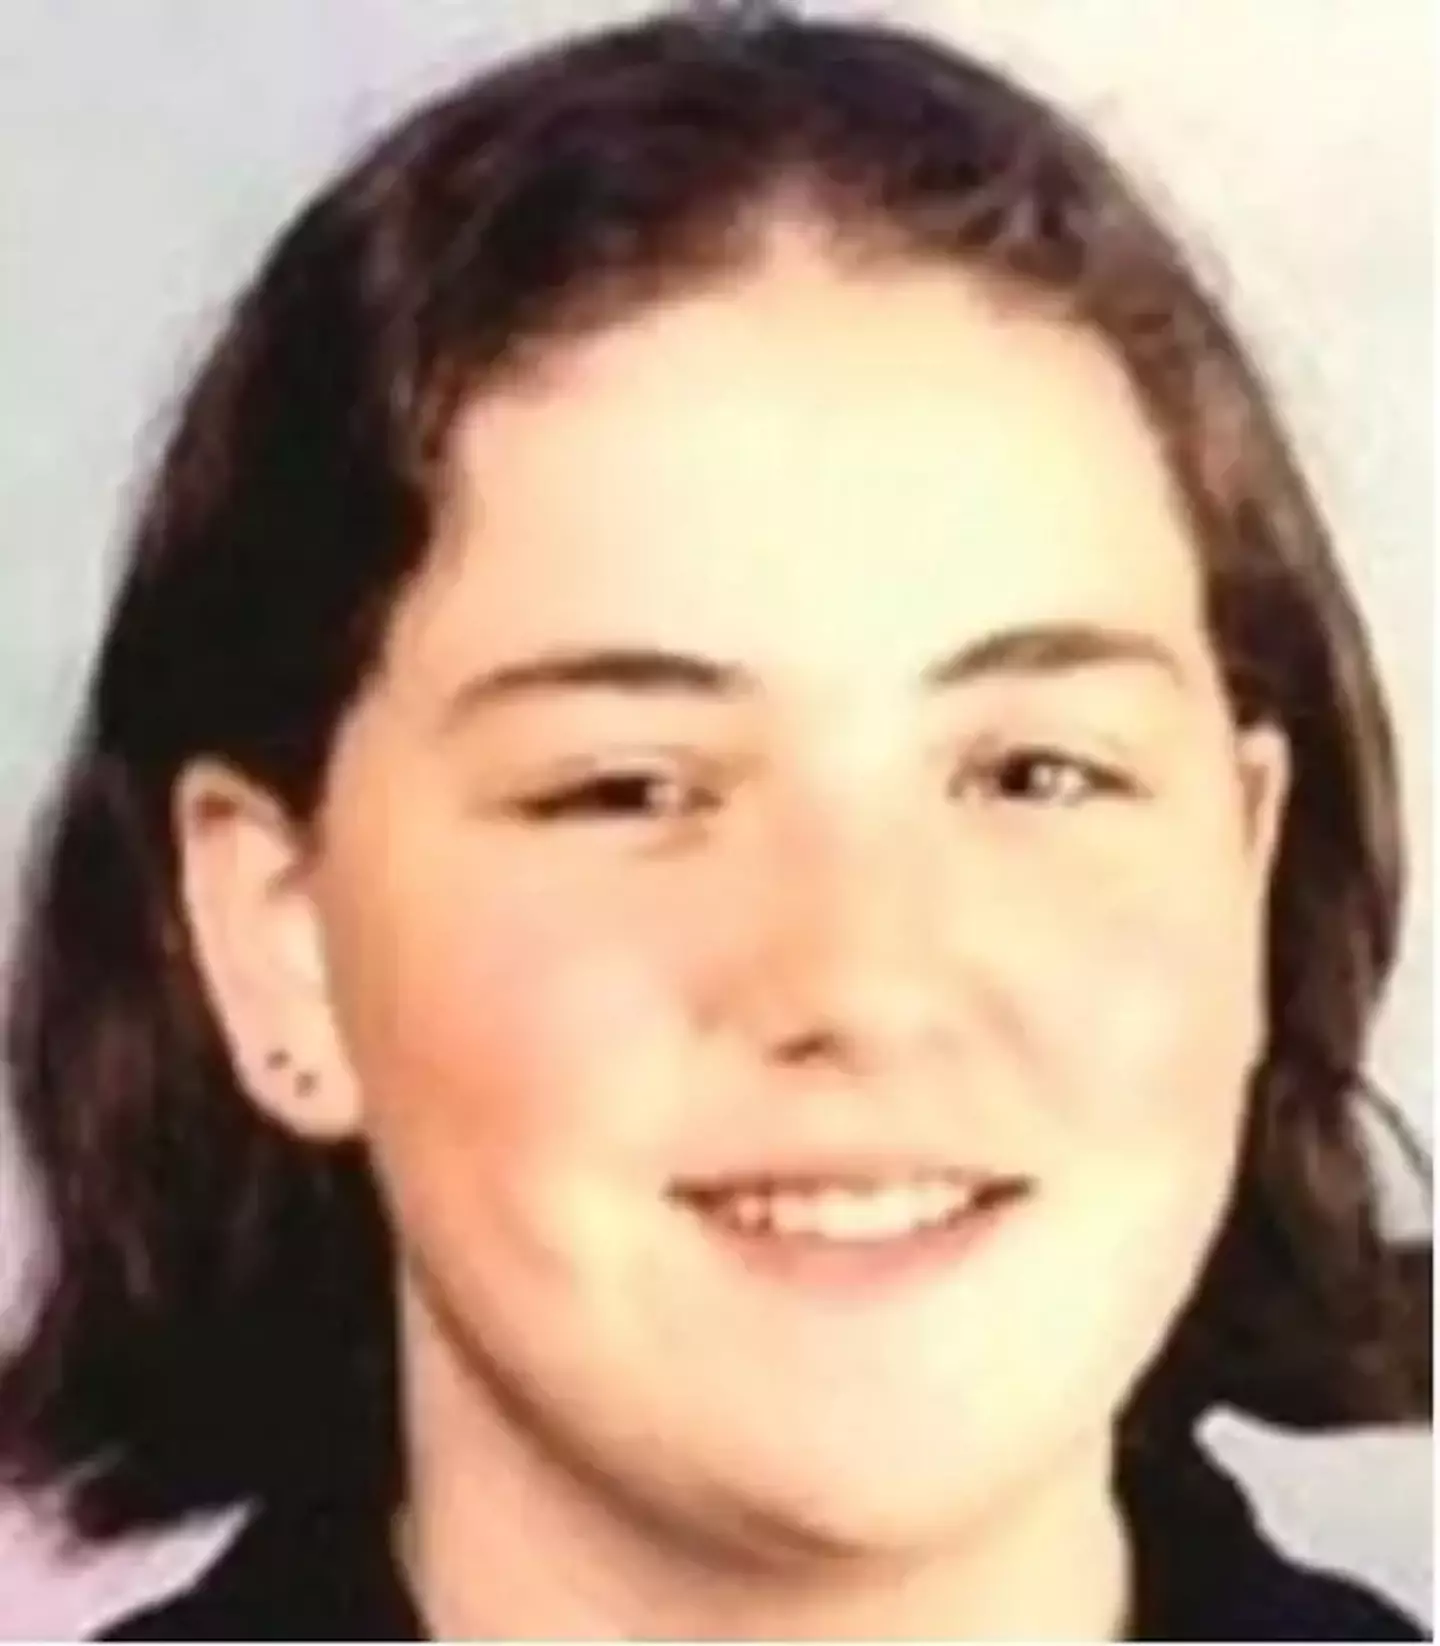 The killer lured Jennifer Long into his pickup truck outside a supermarket where he defiled the young girl and shot her dead.